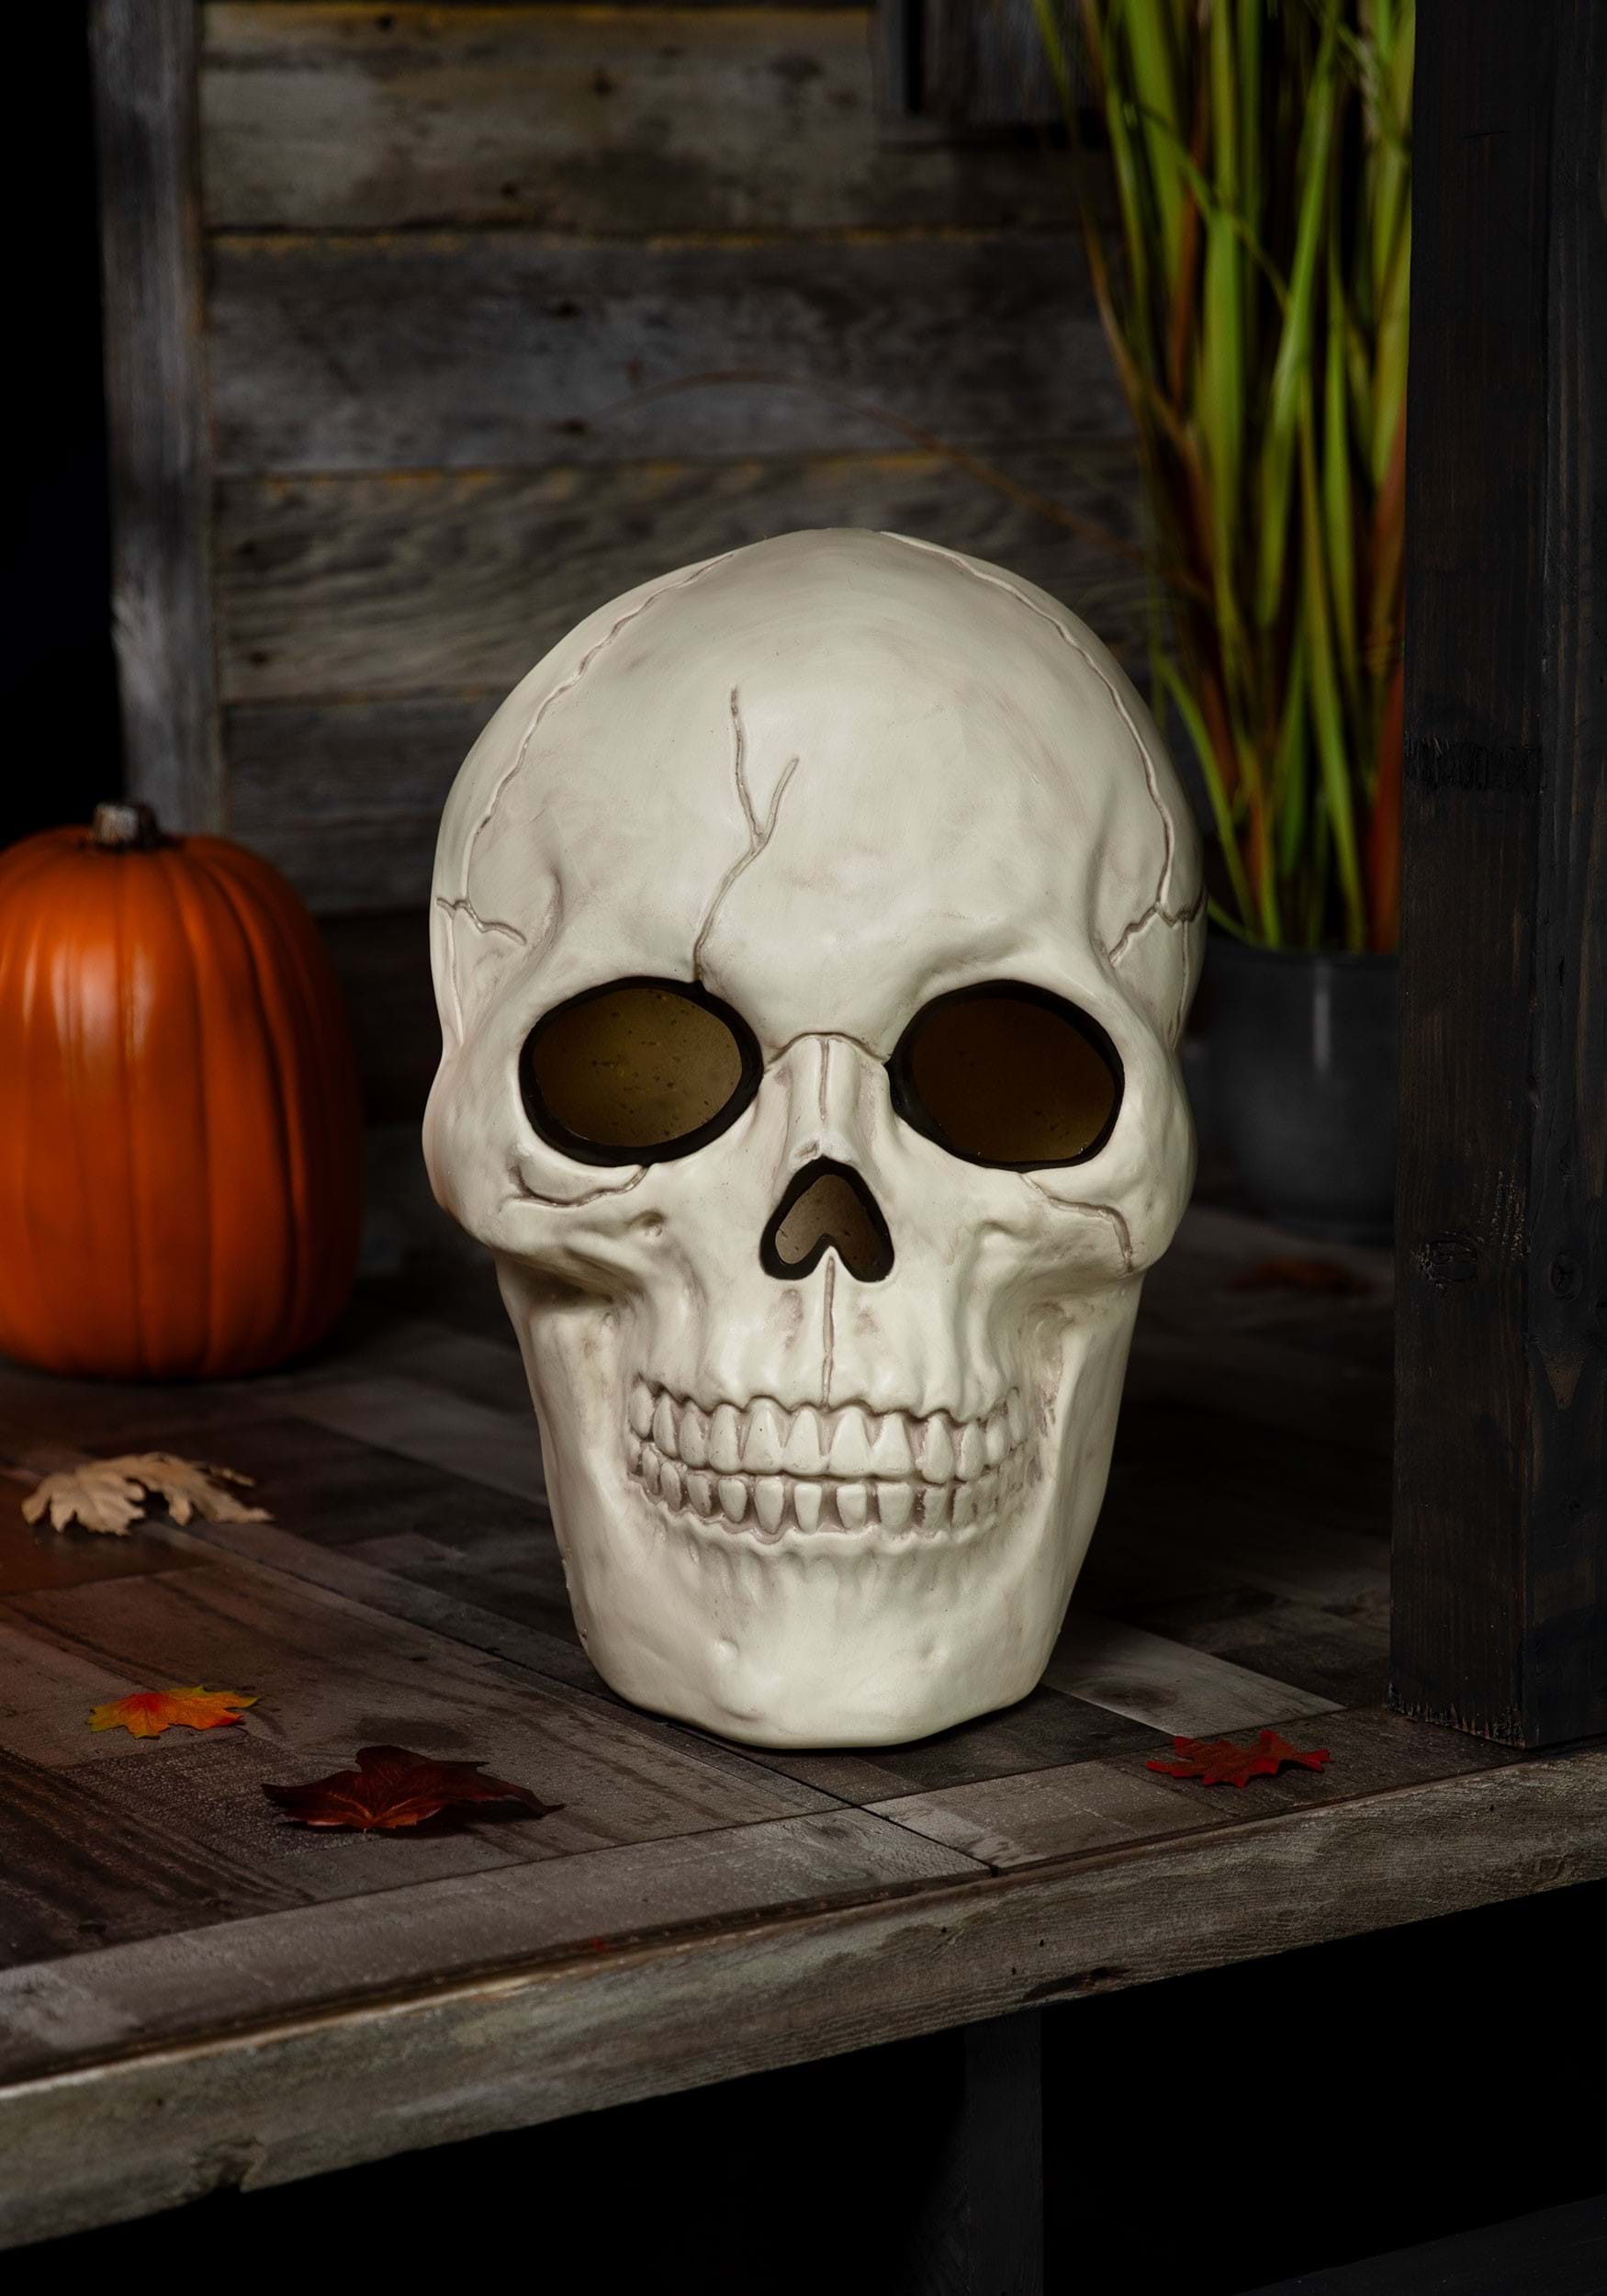 19.75-Inch Light Up And Sound Skull Halloween Prop